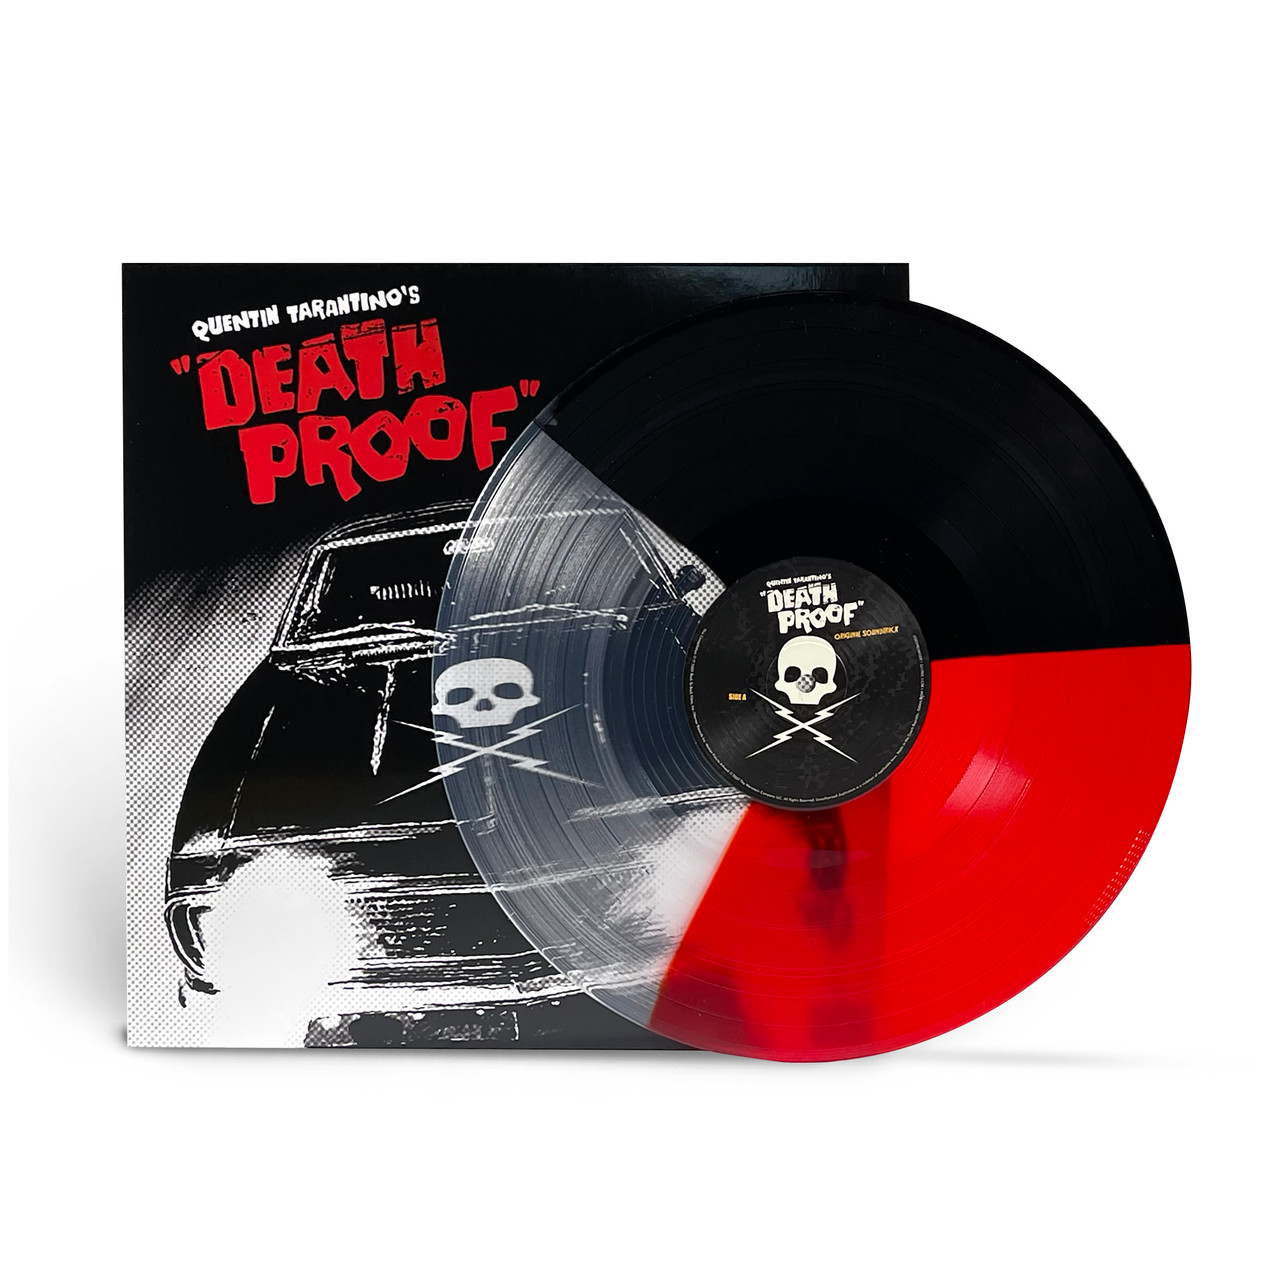 Tri-colour red, clear and black vinyl